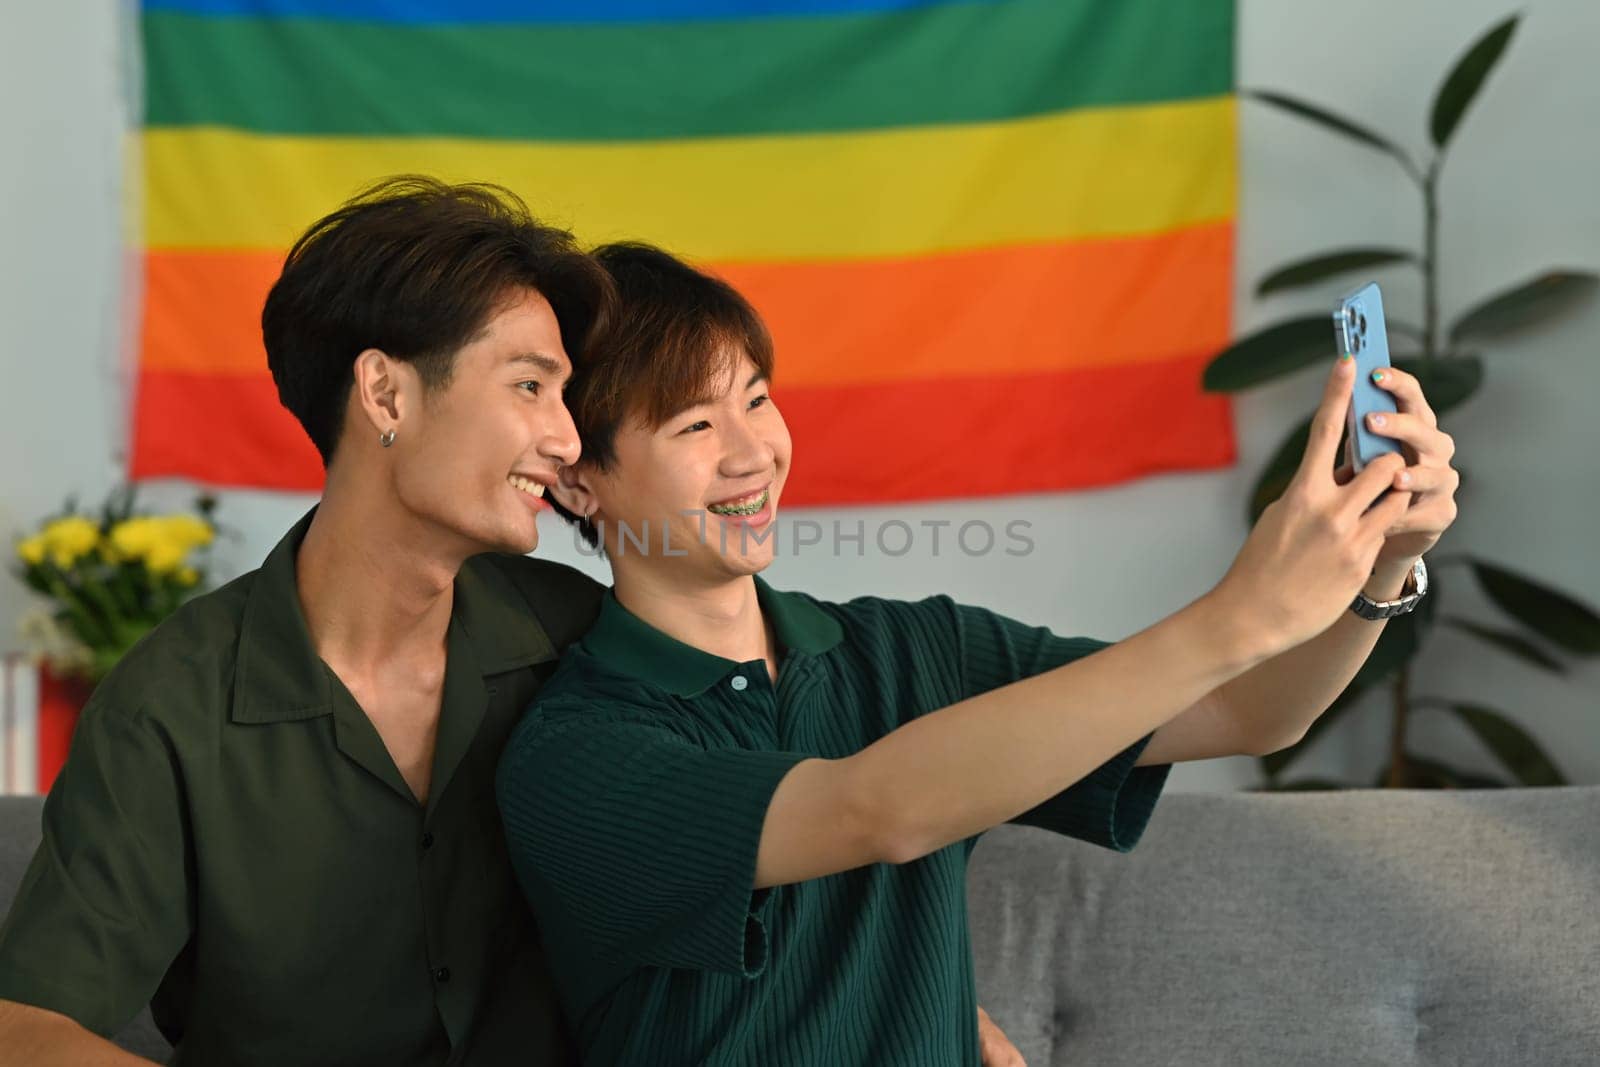 Joyful homosexual couple taking a selfie with smartphone in living room with rainbow flag in background. LGBT and love concept.